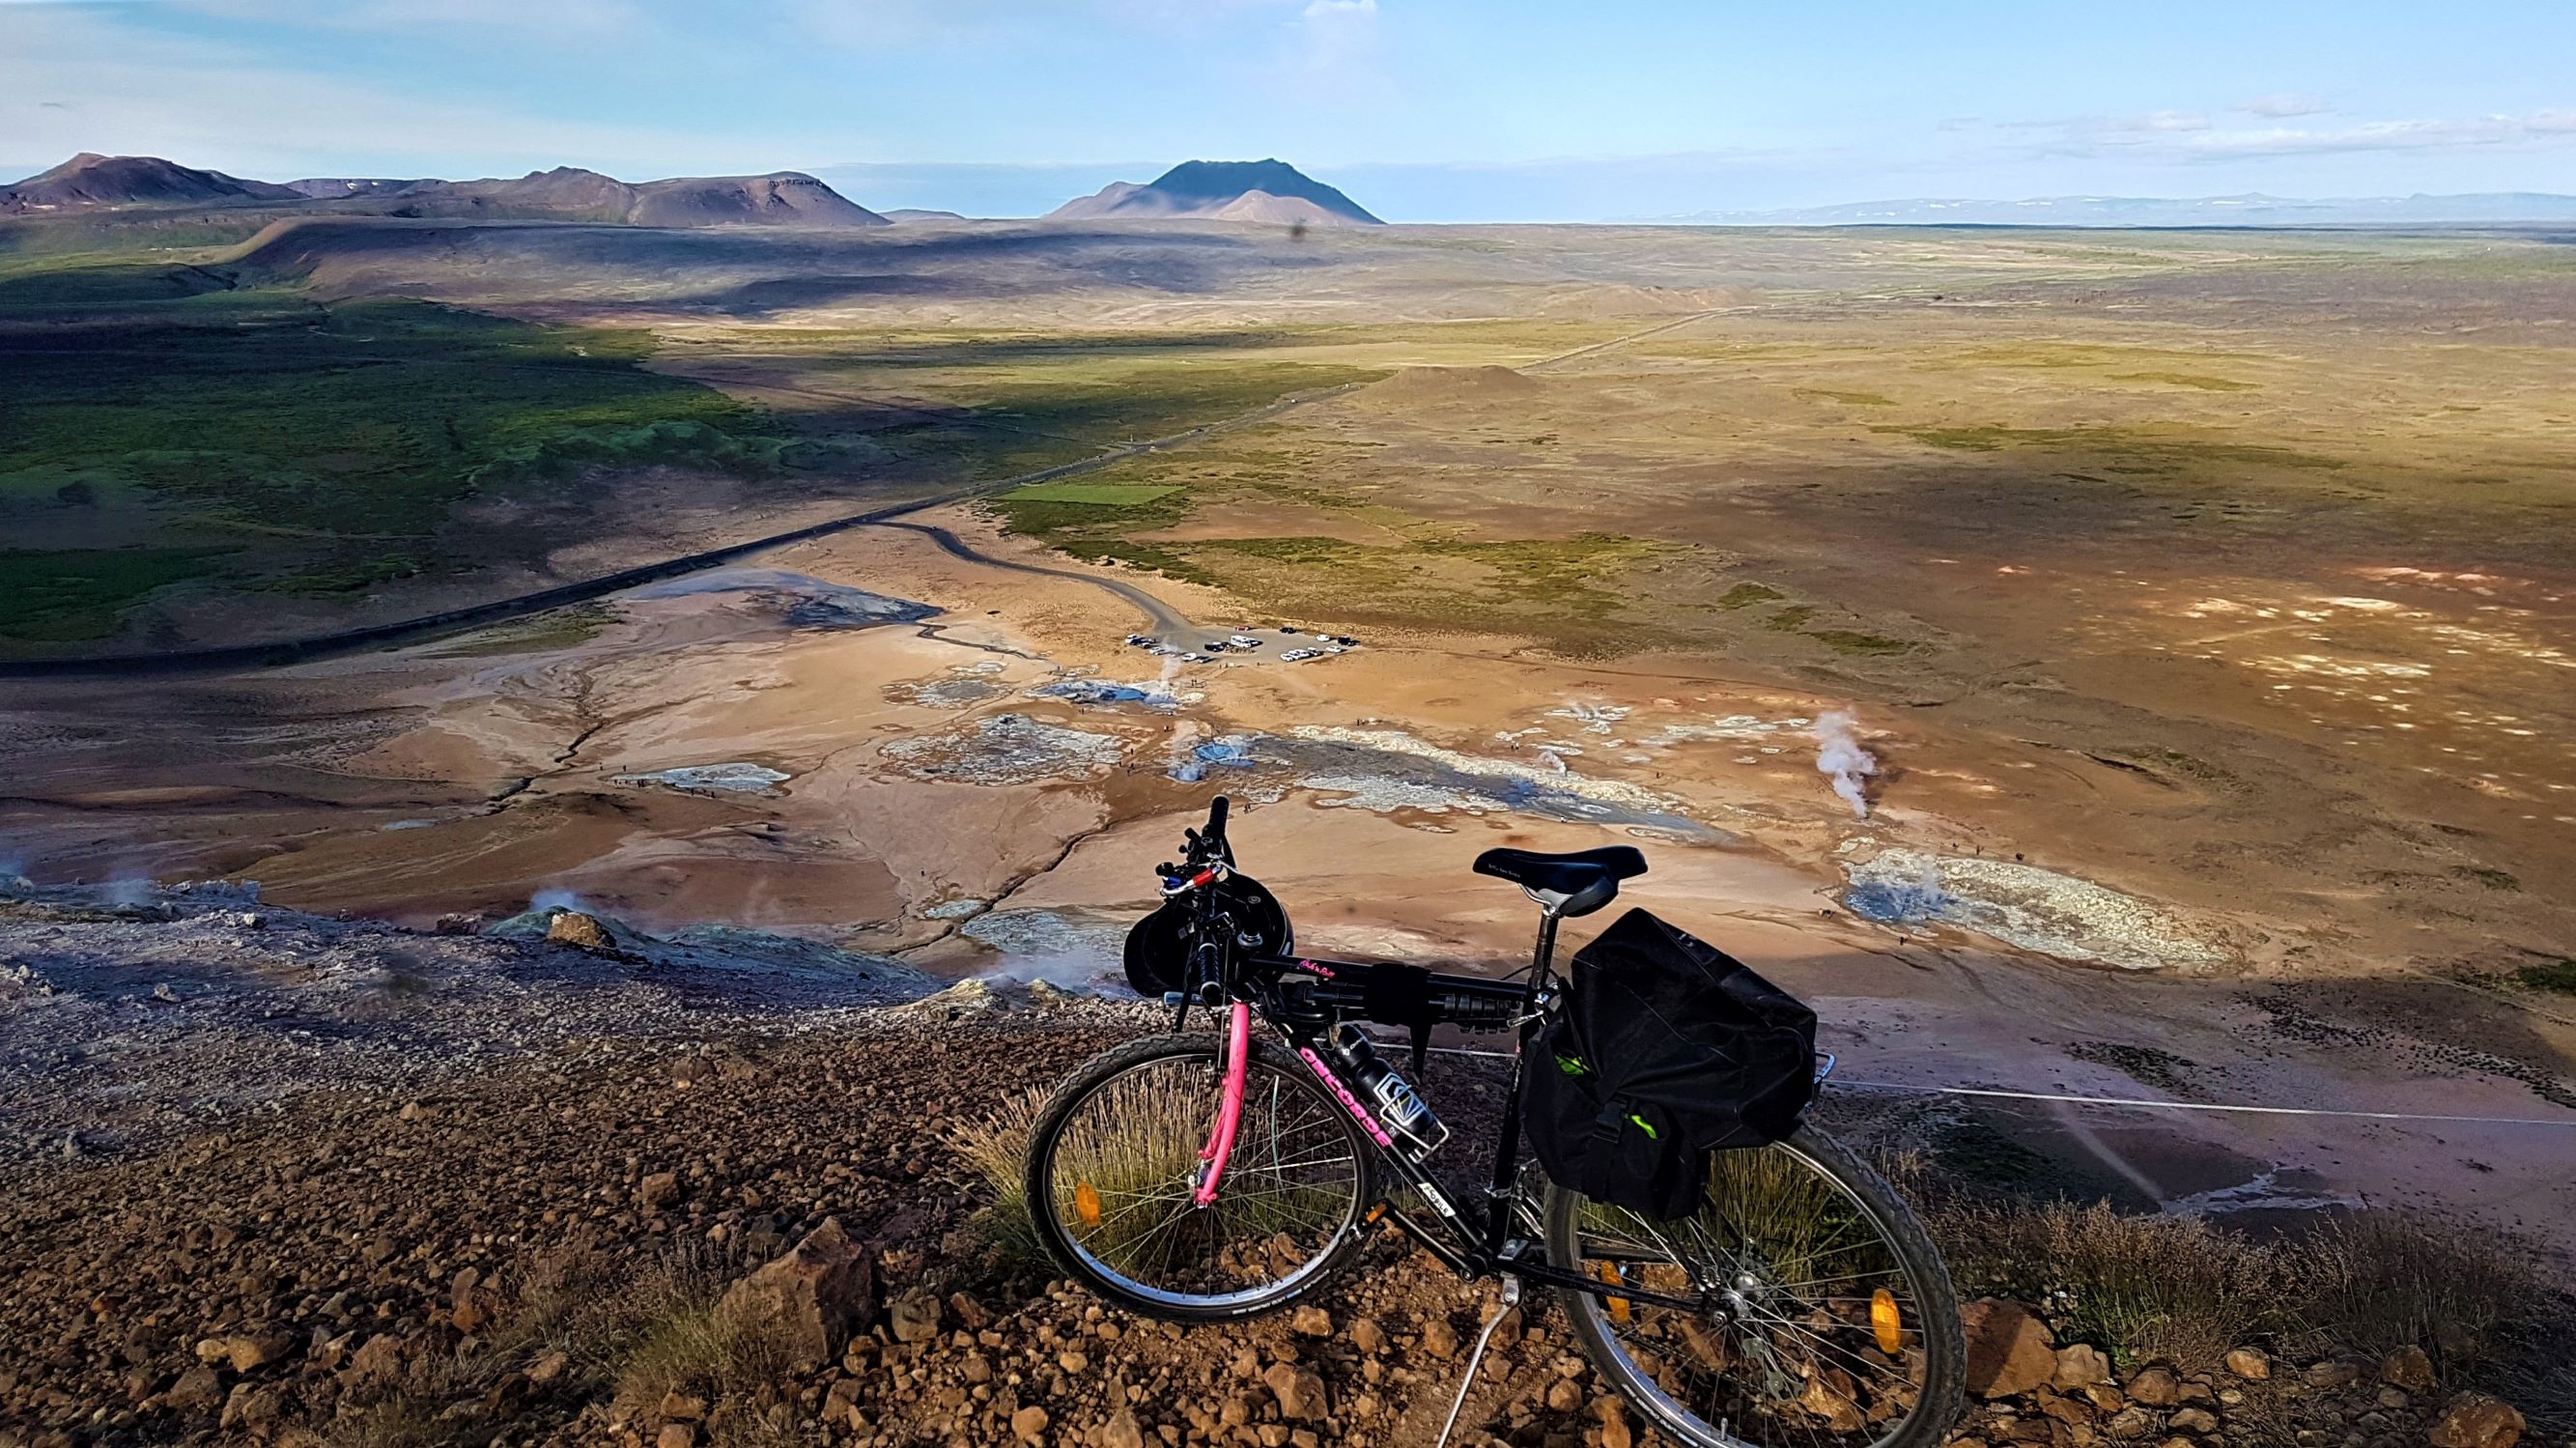 A sole bike located amidst the volcanic landscape of Landmannalaugar in the Icelandic Highlands